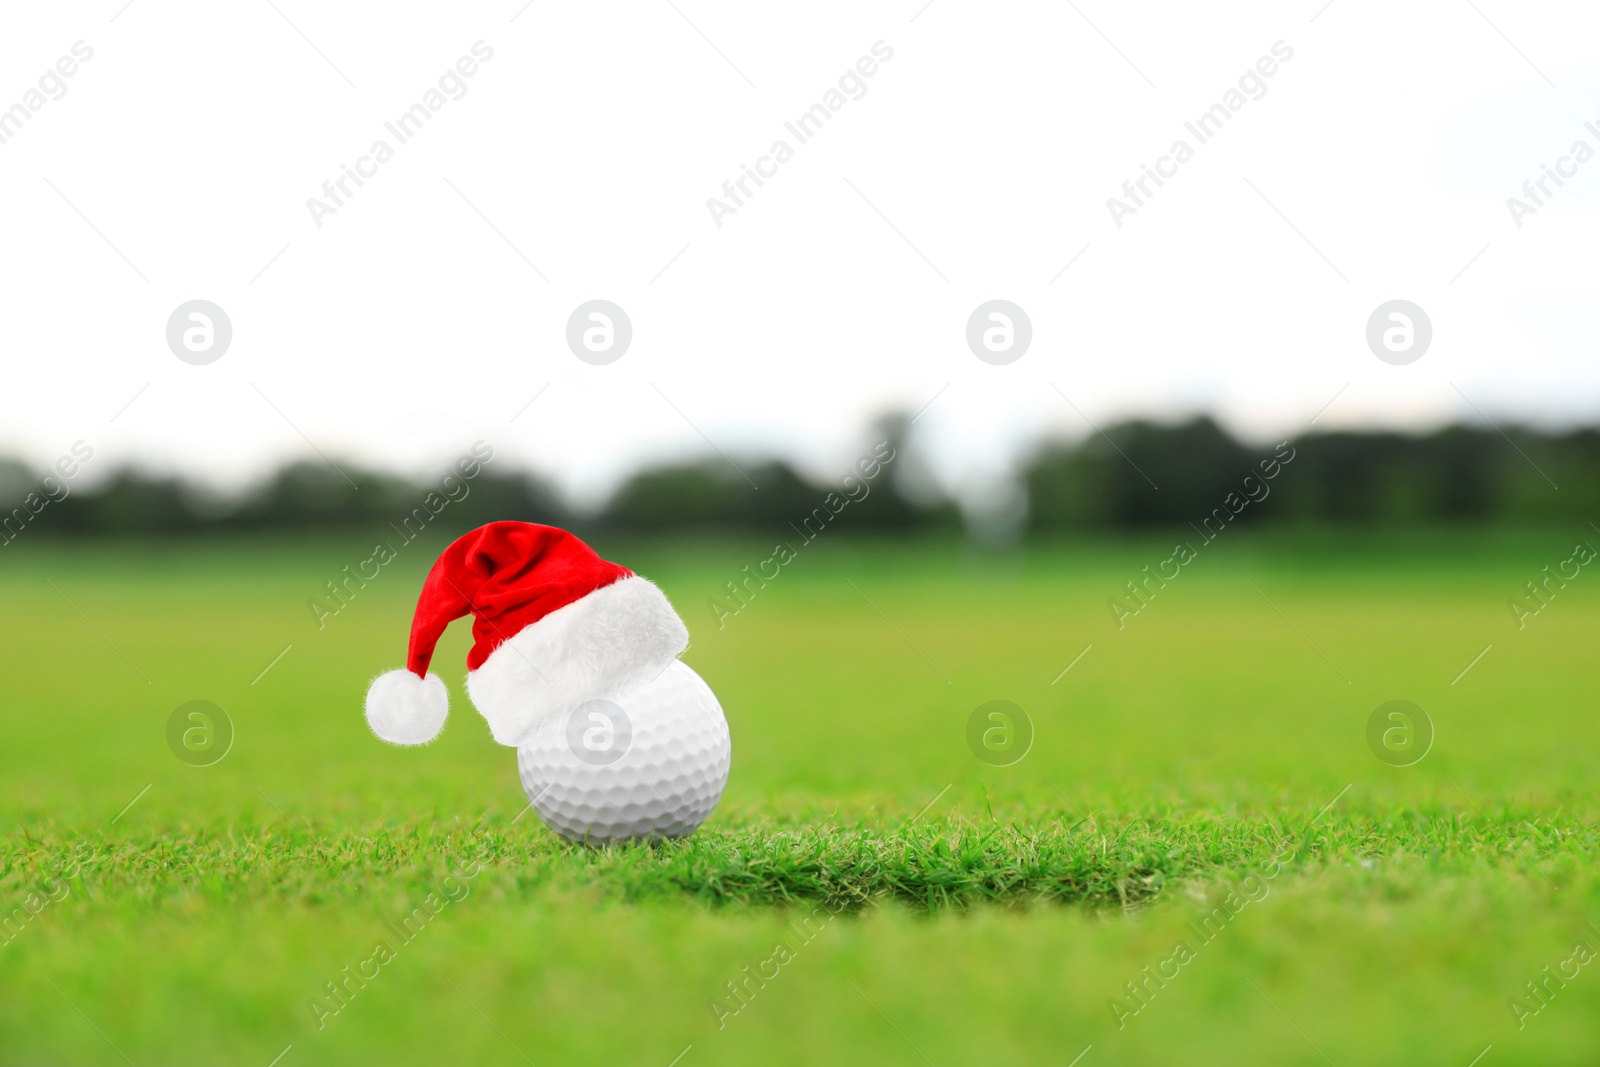 Image of Golf ball with small Santa hat near hole on green course